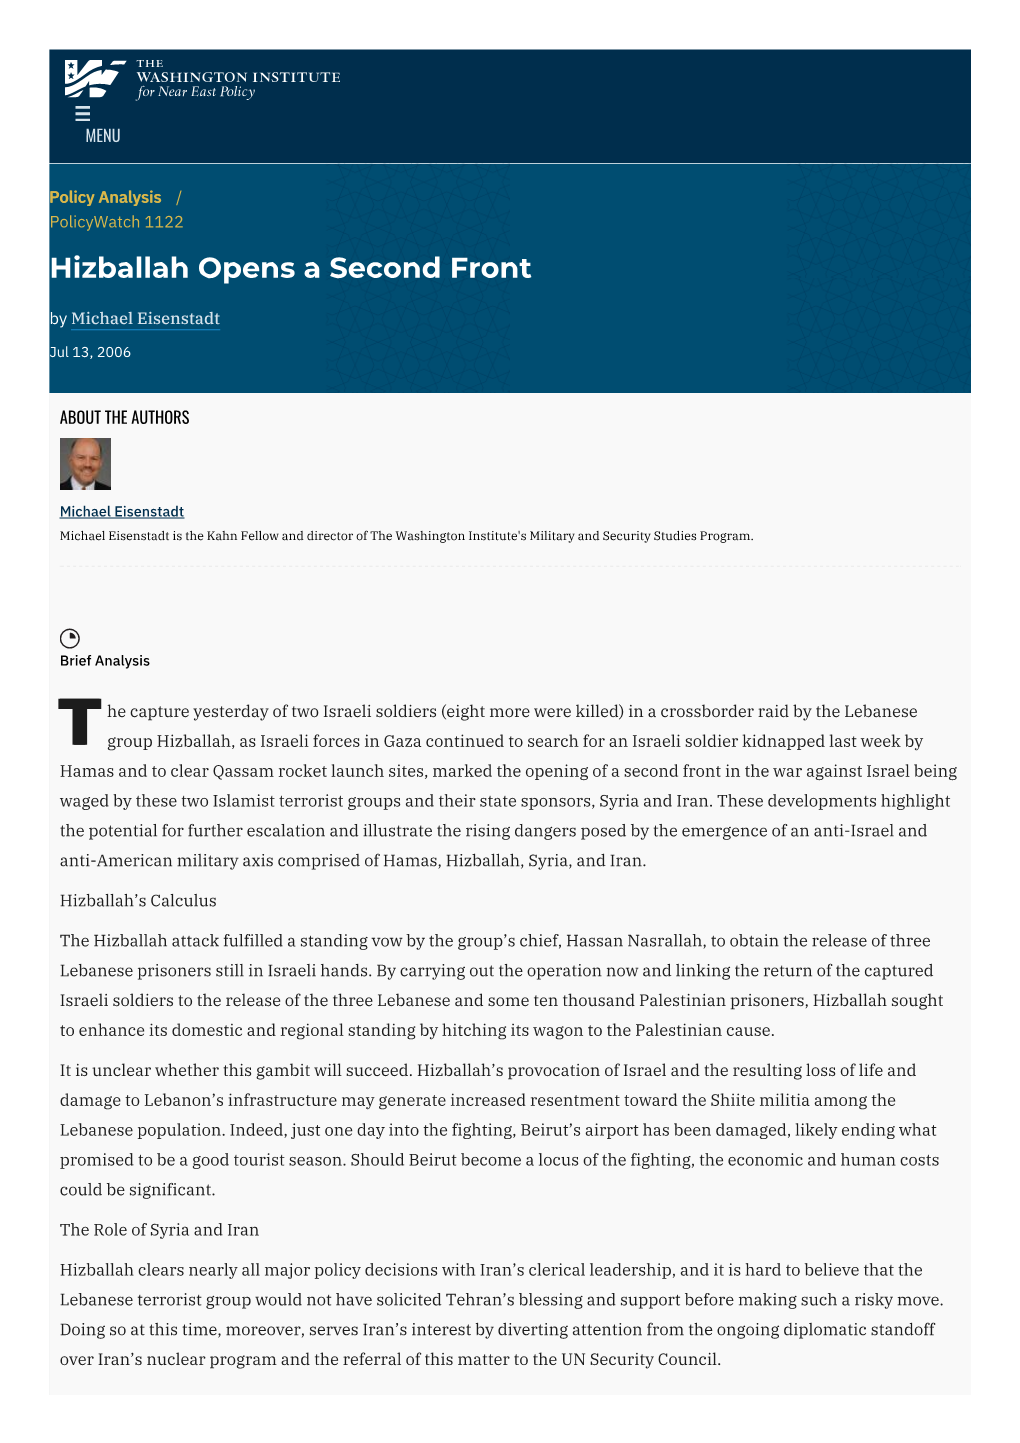 Hizballah Opens a Second Front | the Washington Institute